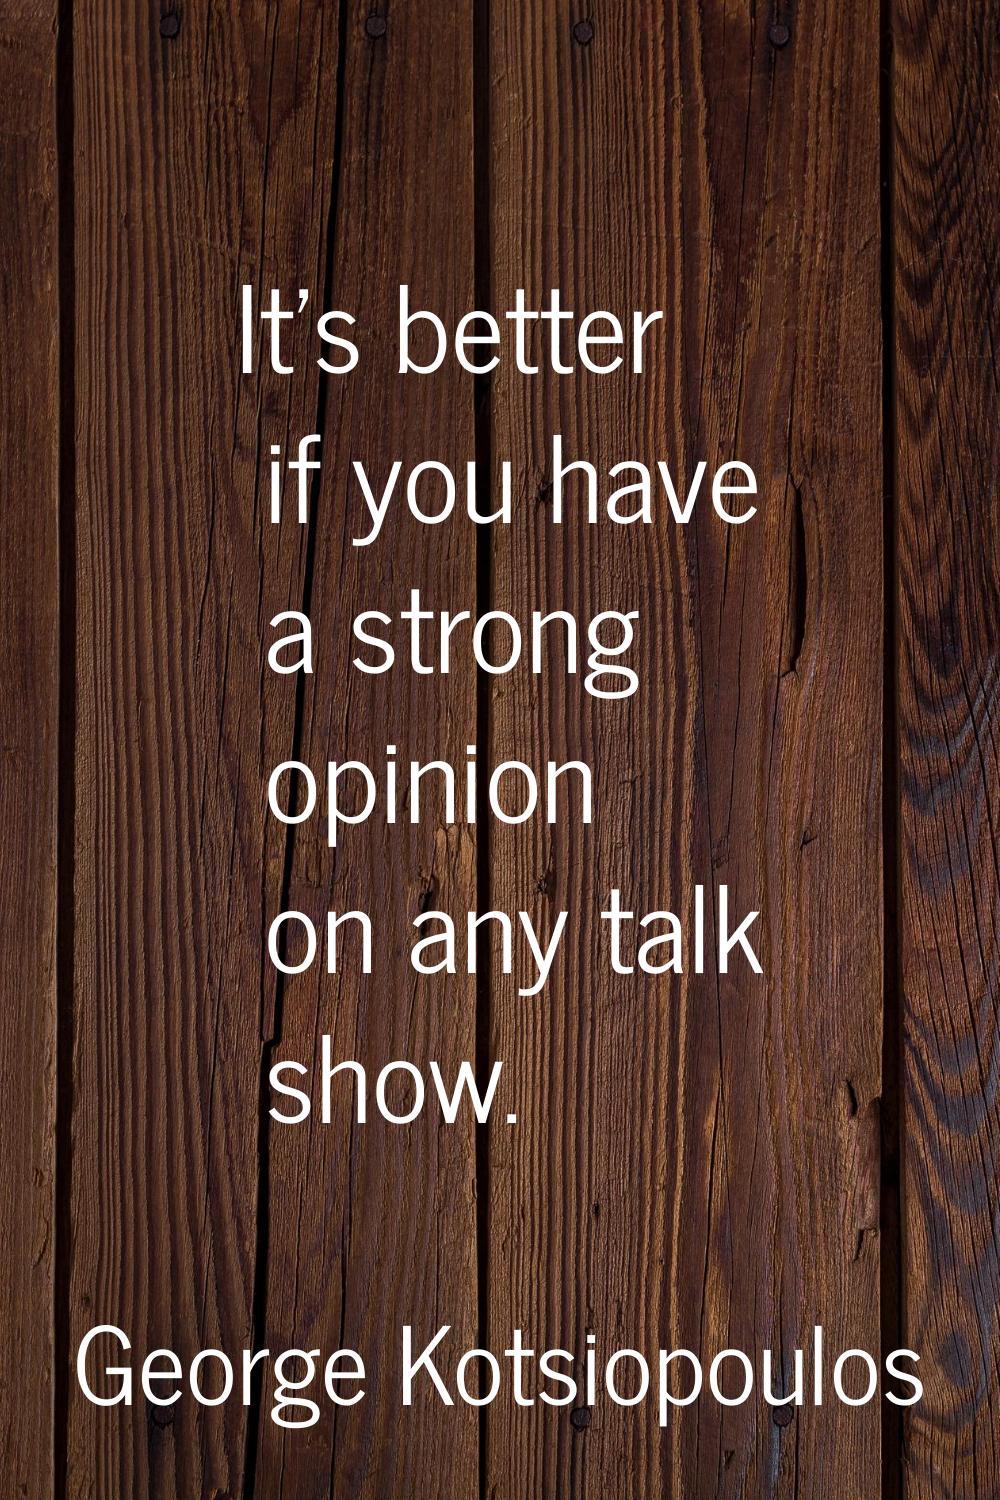 It's better if you have a strong opinion on any talk show.